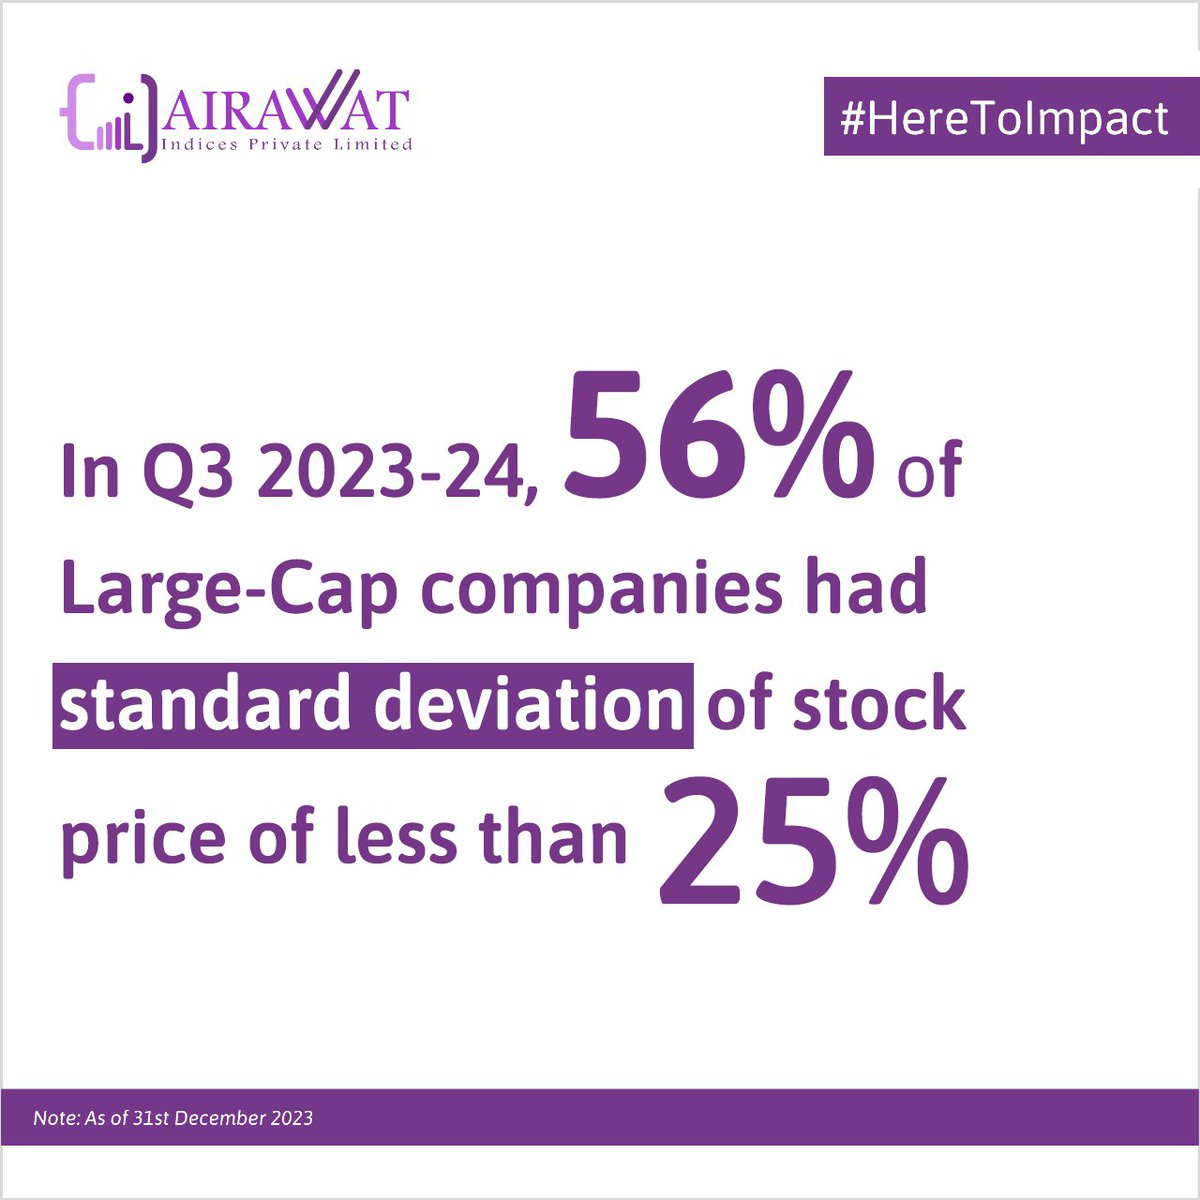 #HereToImpact
For more such insights follow this space or visit airawatindices.com

#AirawatIndices #mutualfunds #financialmarket #insights #data #marketanalysis #investing101 #index #atom #investmentideas #thematicinvesting